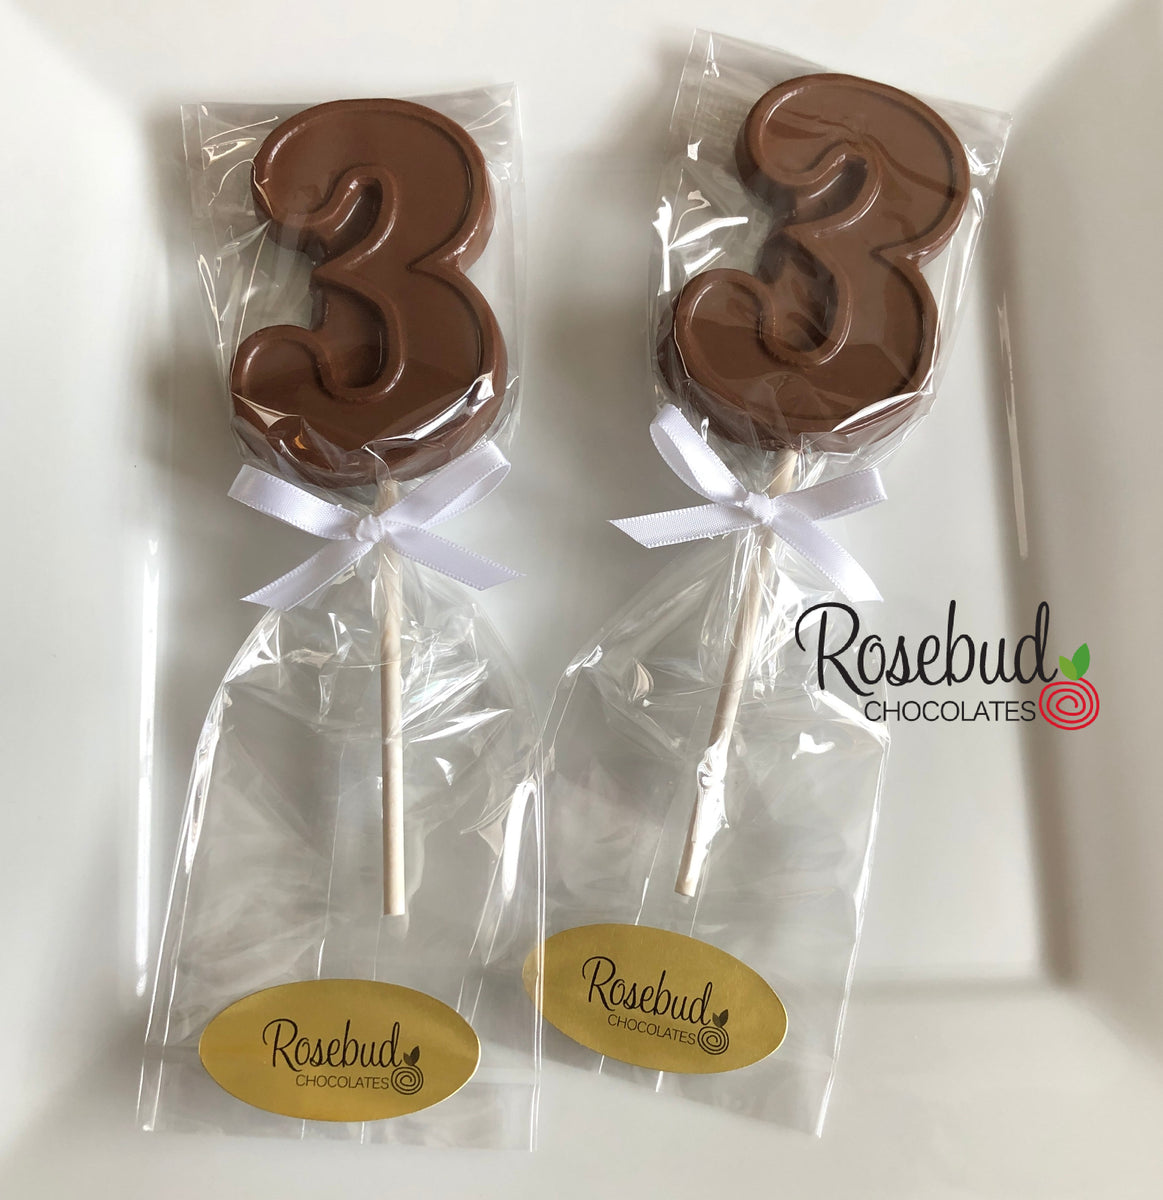 12 NUMBER TWENTY ONE #21 Chocolate Lollipop Candy Party Favors 21st Birthday